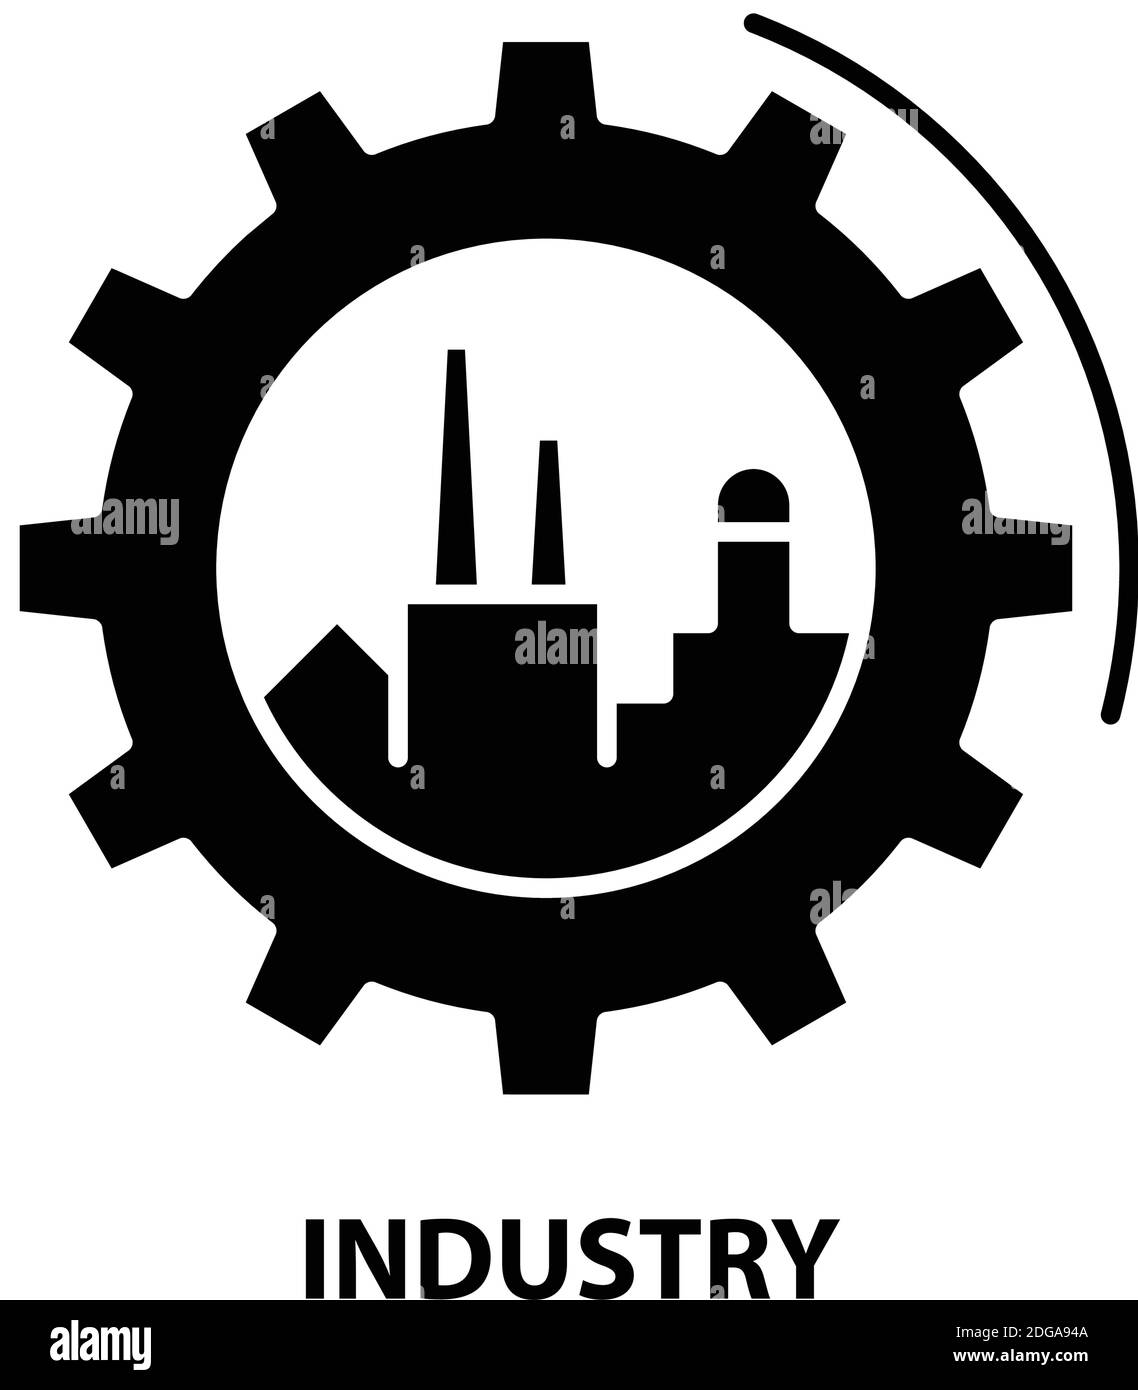 industry icon, black vector sign with editable strokes, concept illustration Stock Vector